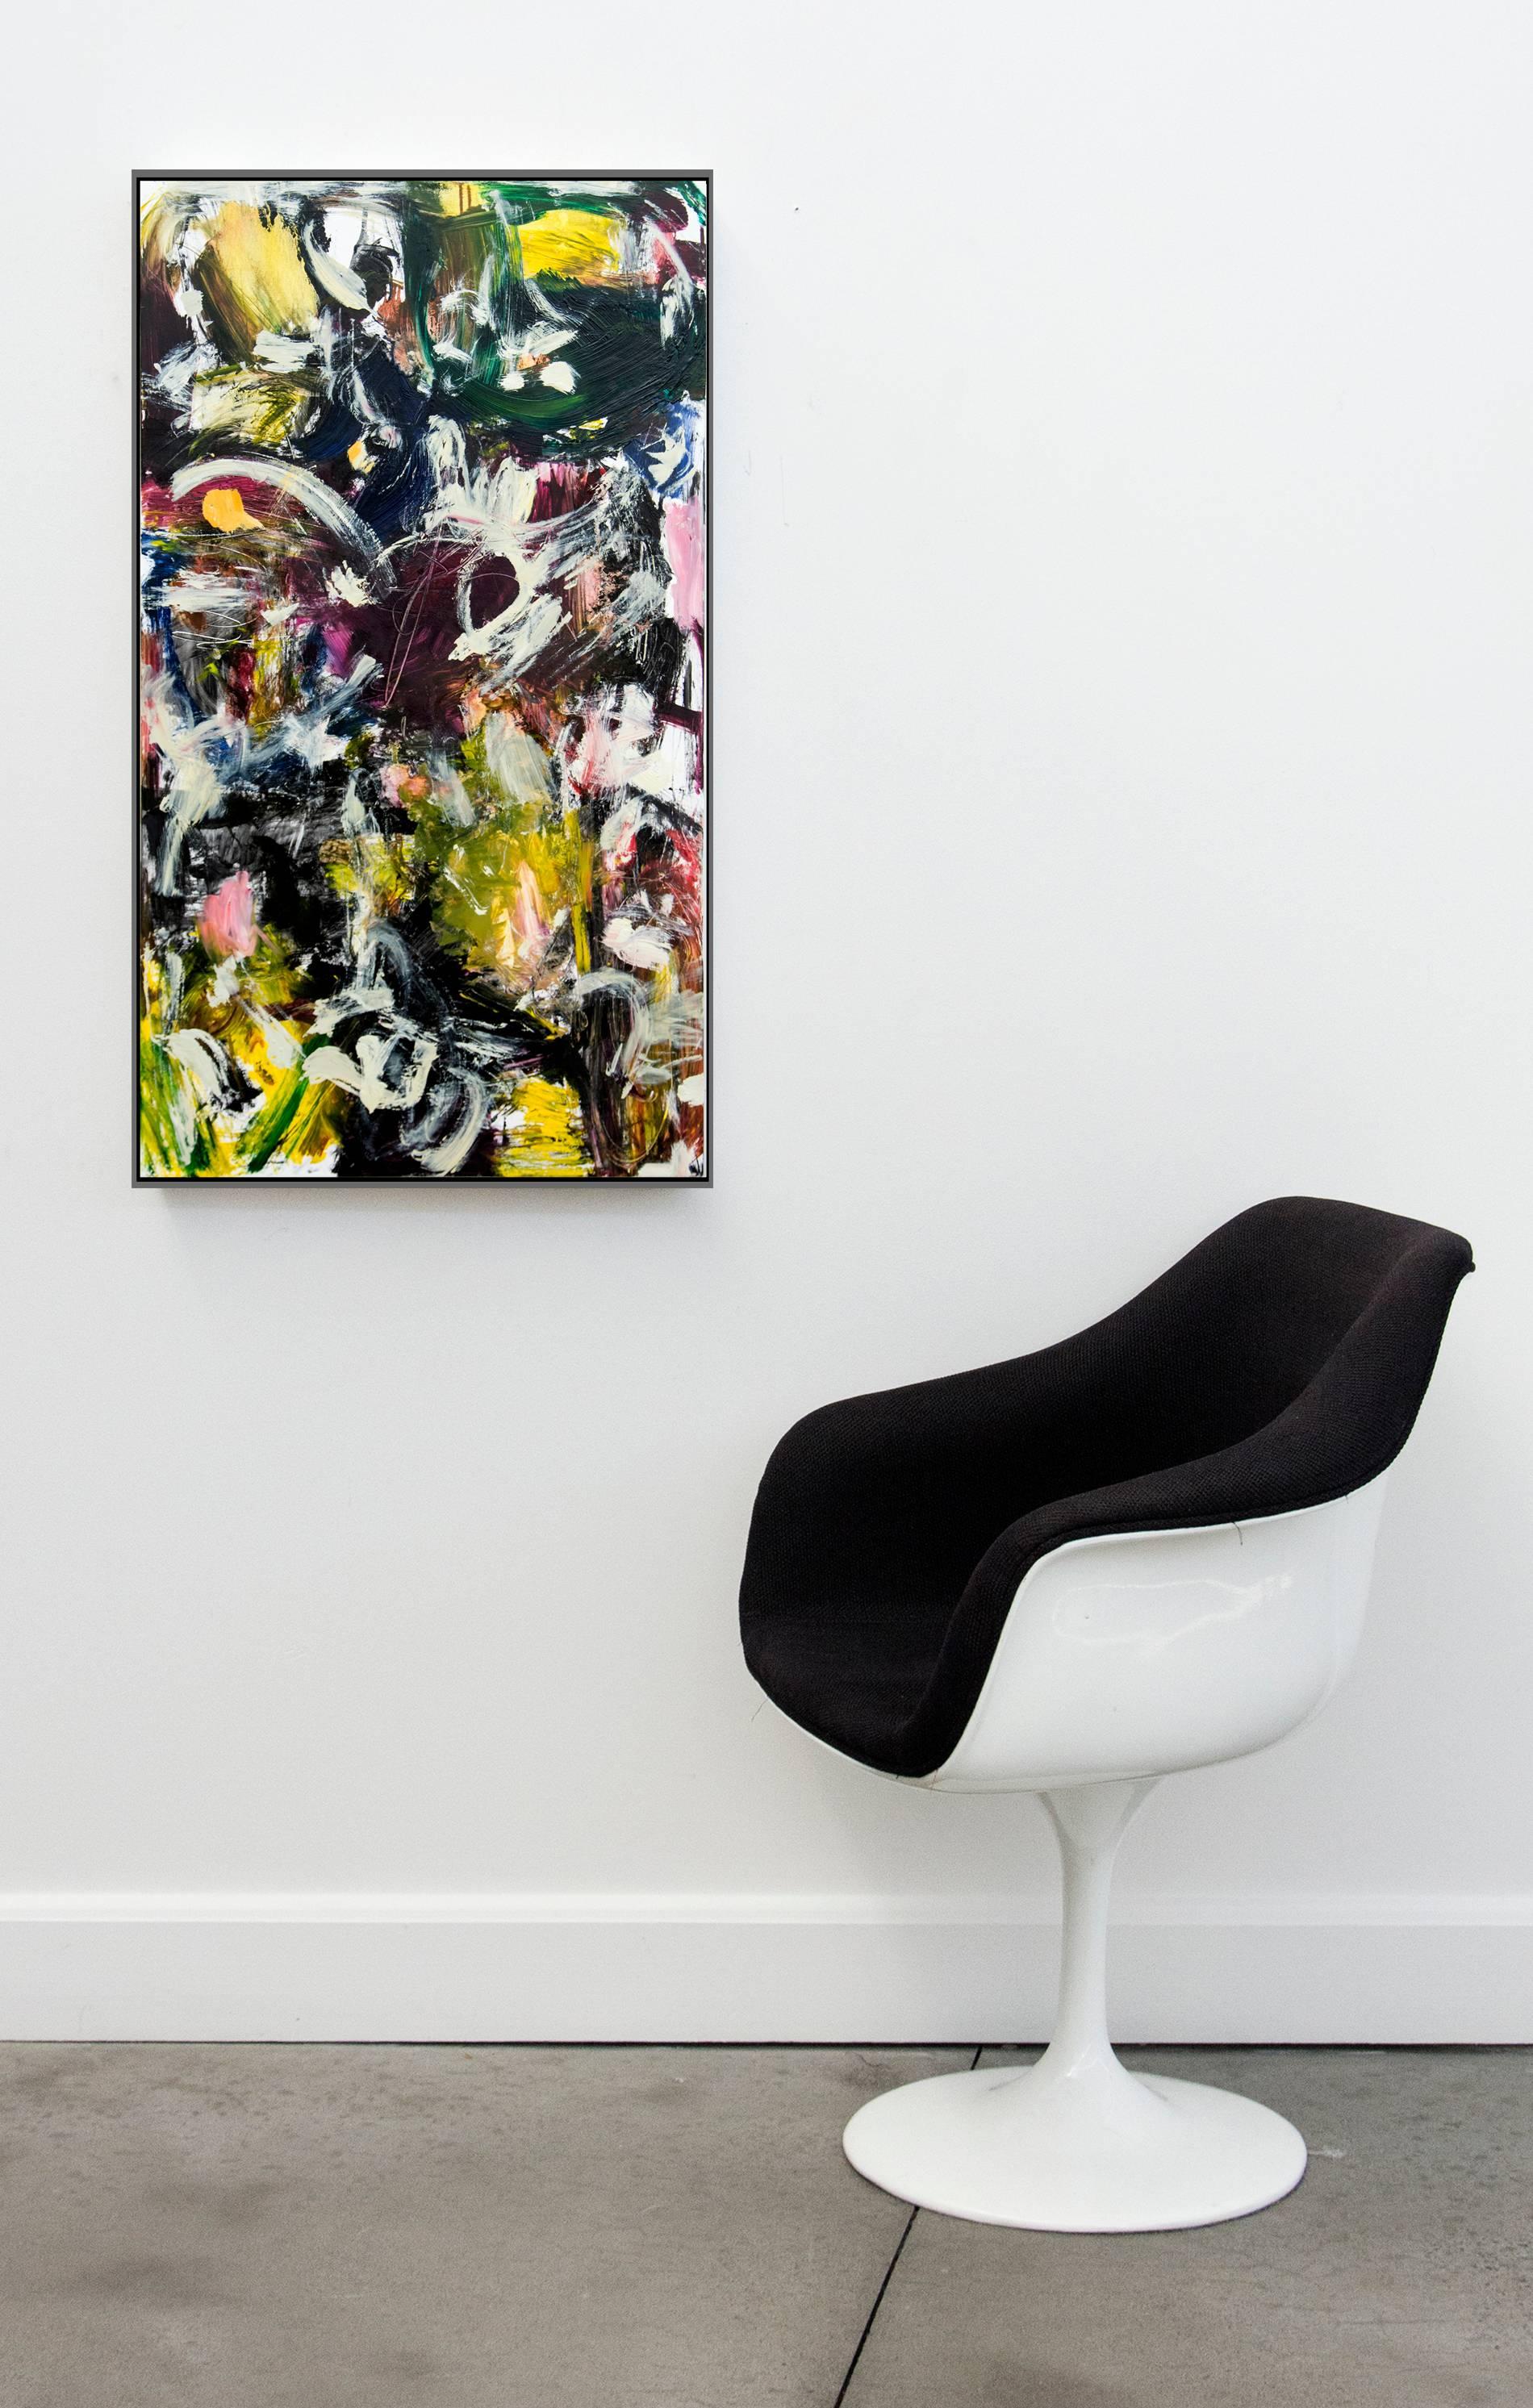 Kairoi No 38 - Tall, black, yellow, white, gestural abstract, oil on canvas - Painting by Scott Pattinson